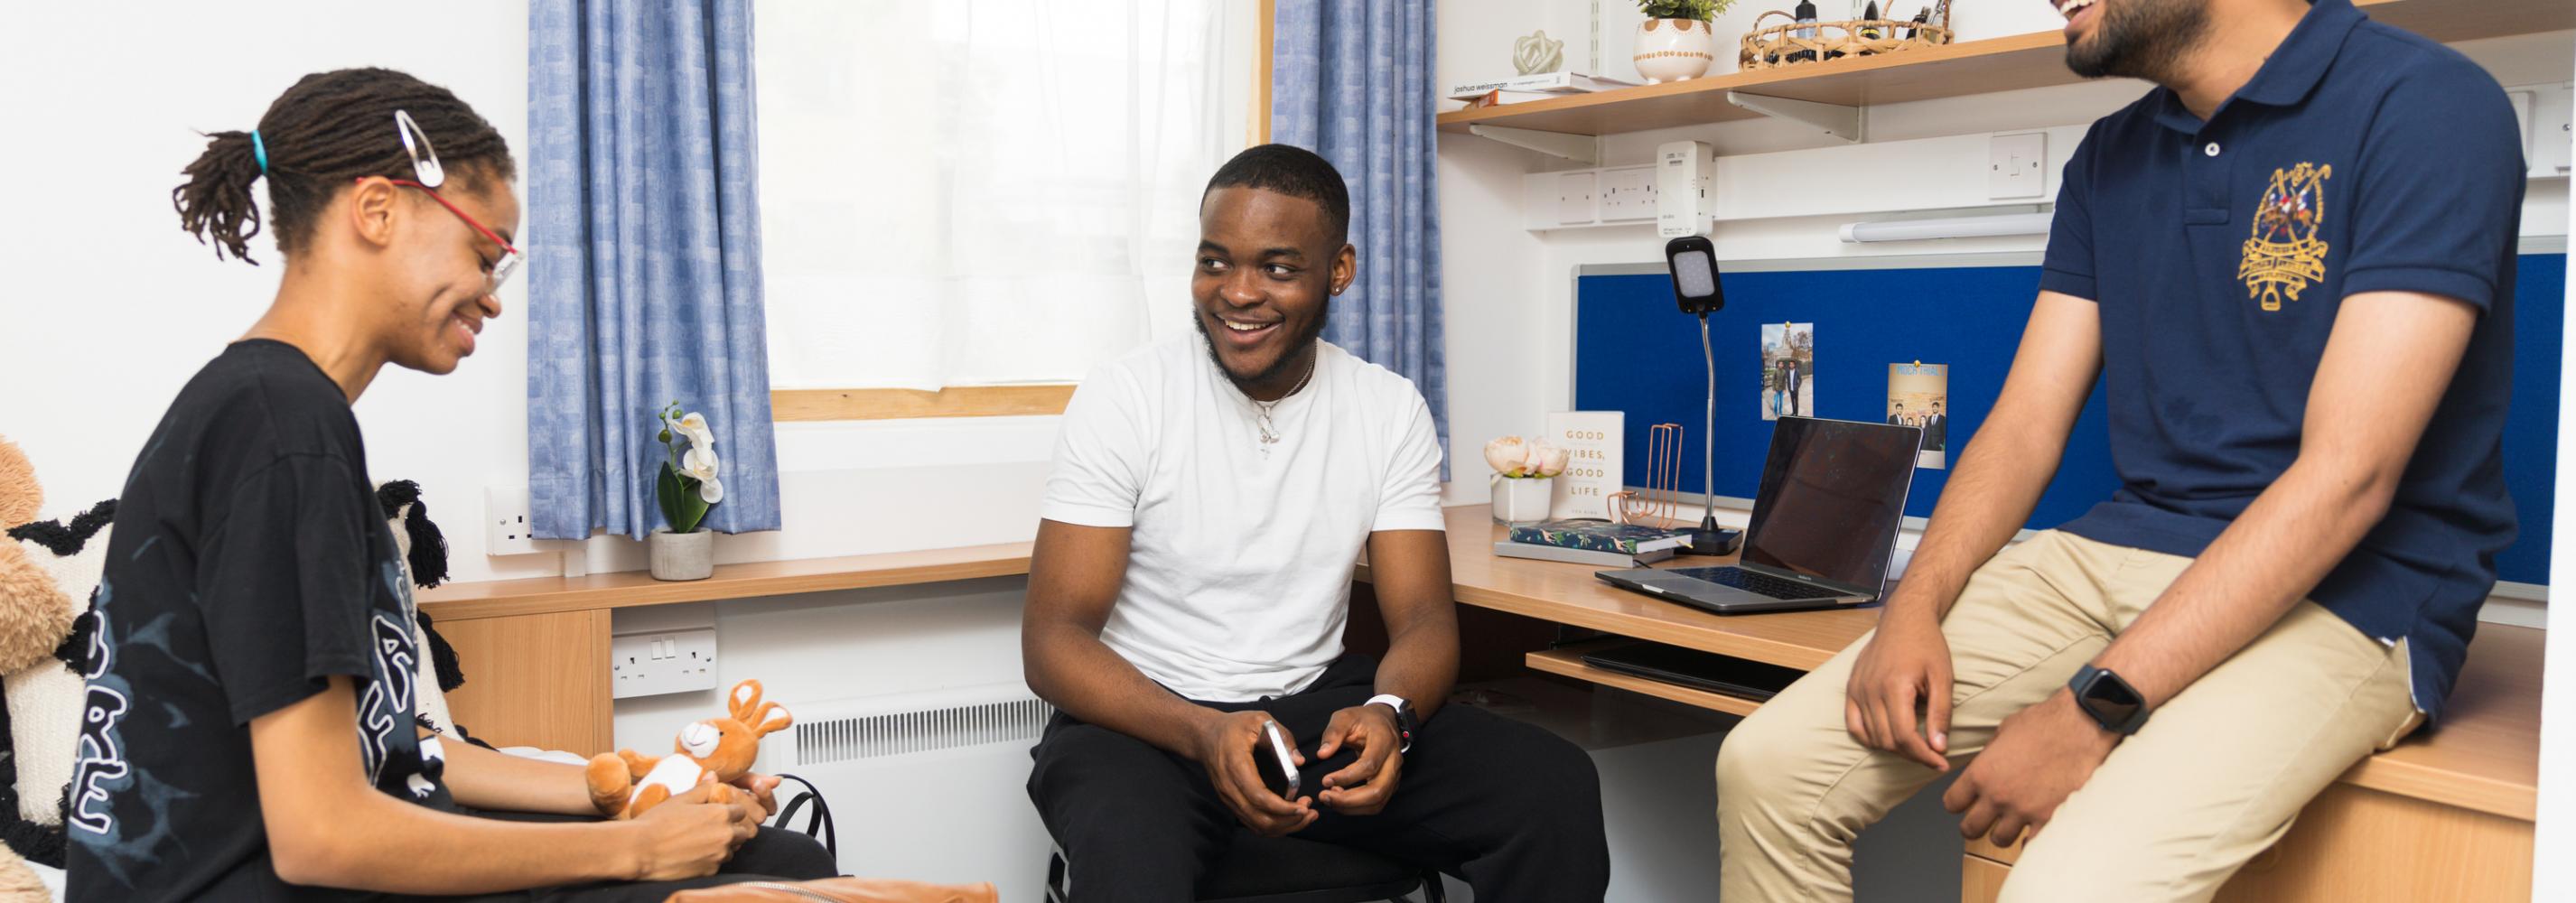 Students chatting in a bedroom on de Havilland campus